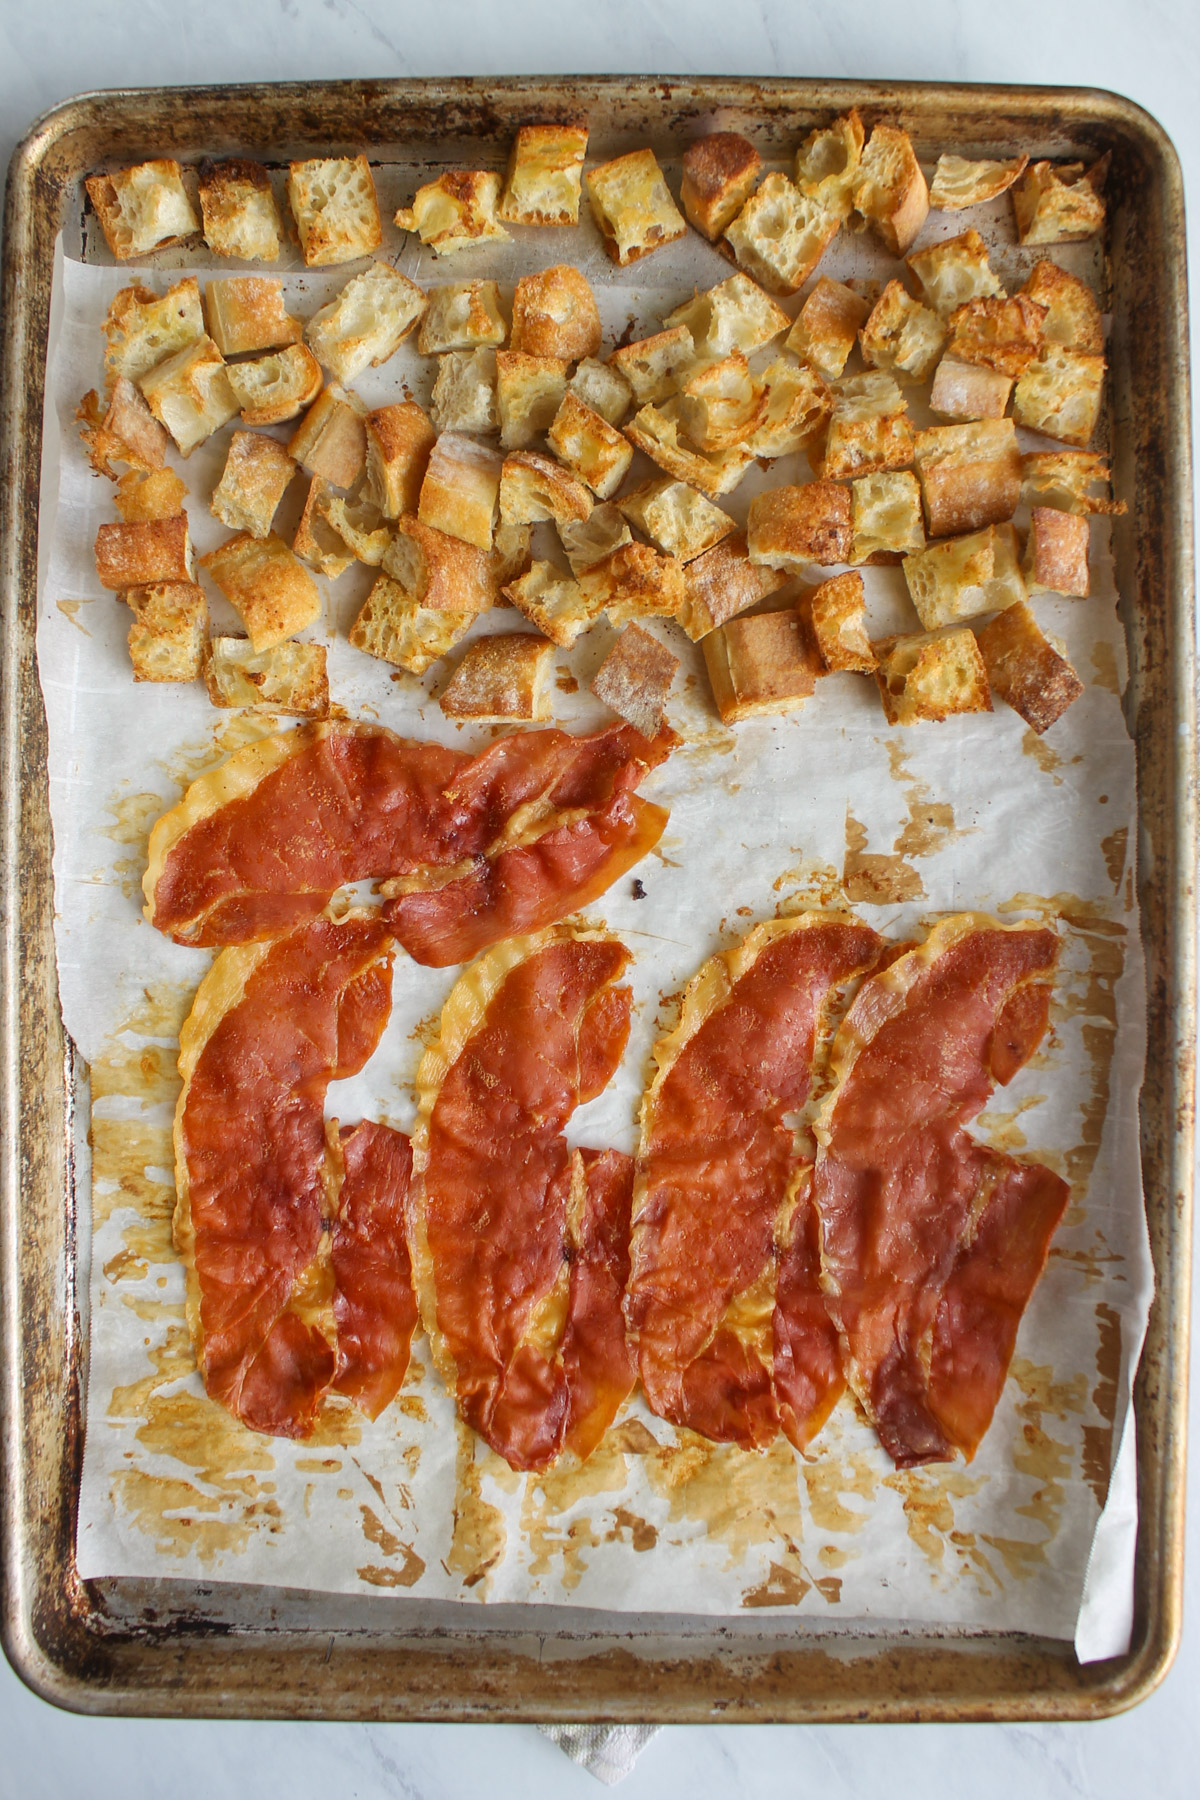 Baked croutons and crispy prosciutto on a sheet pan hot from the oven.